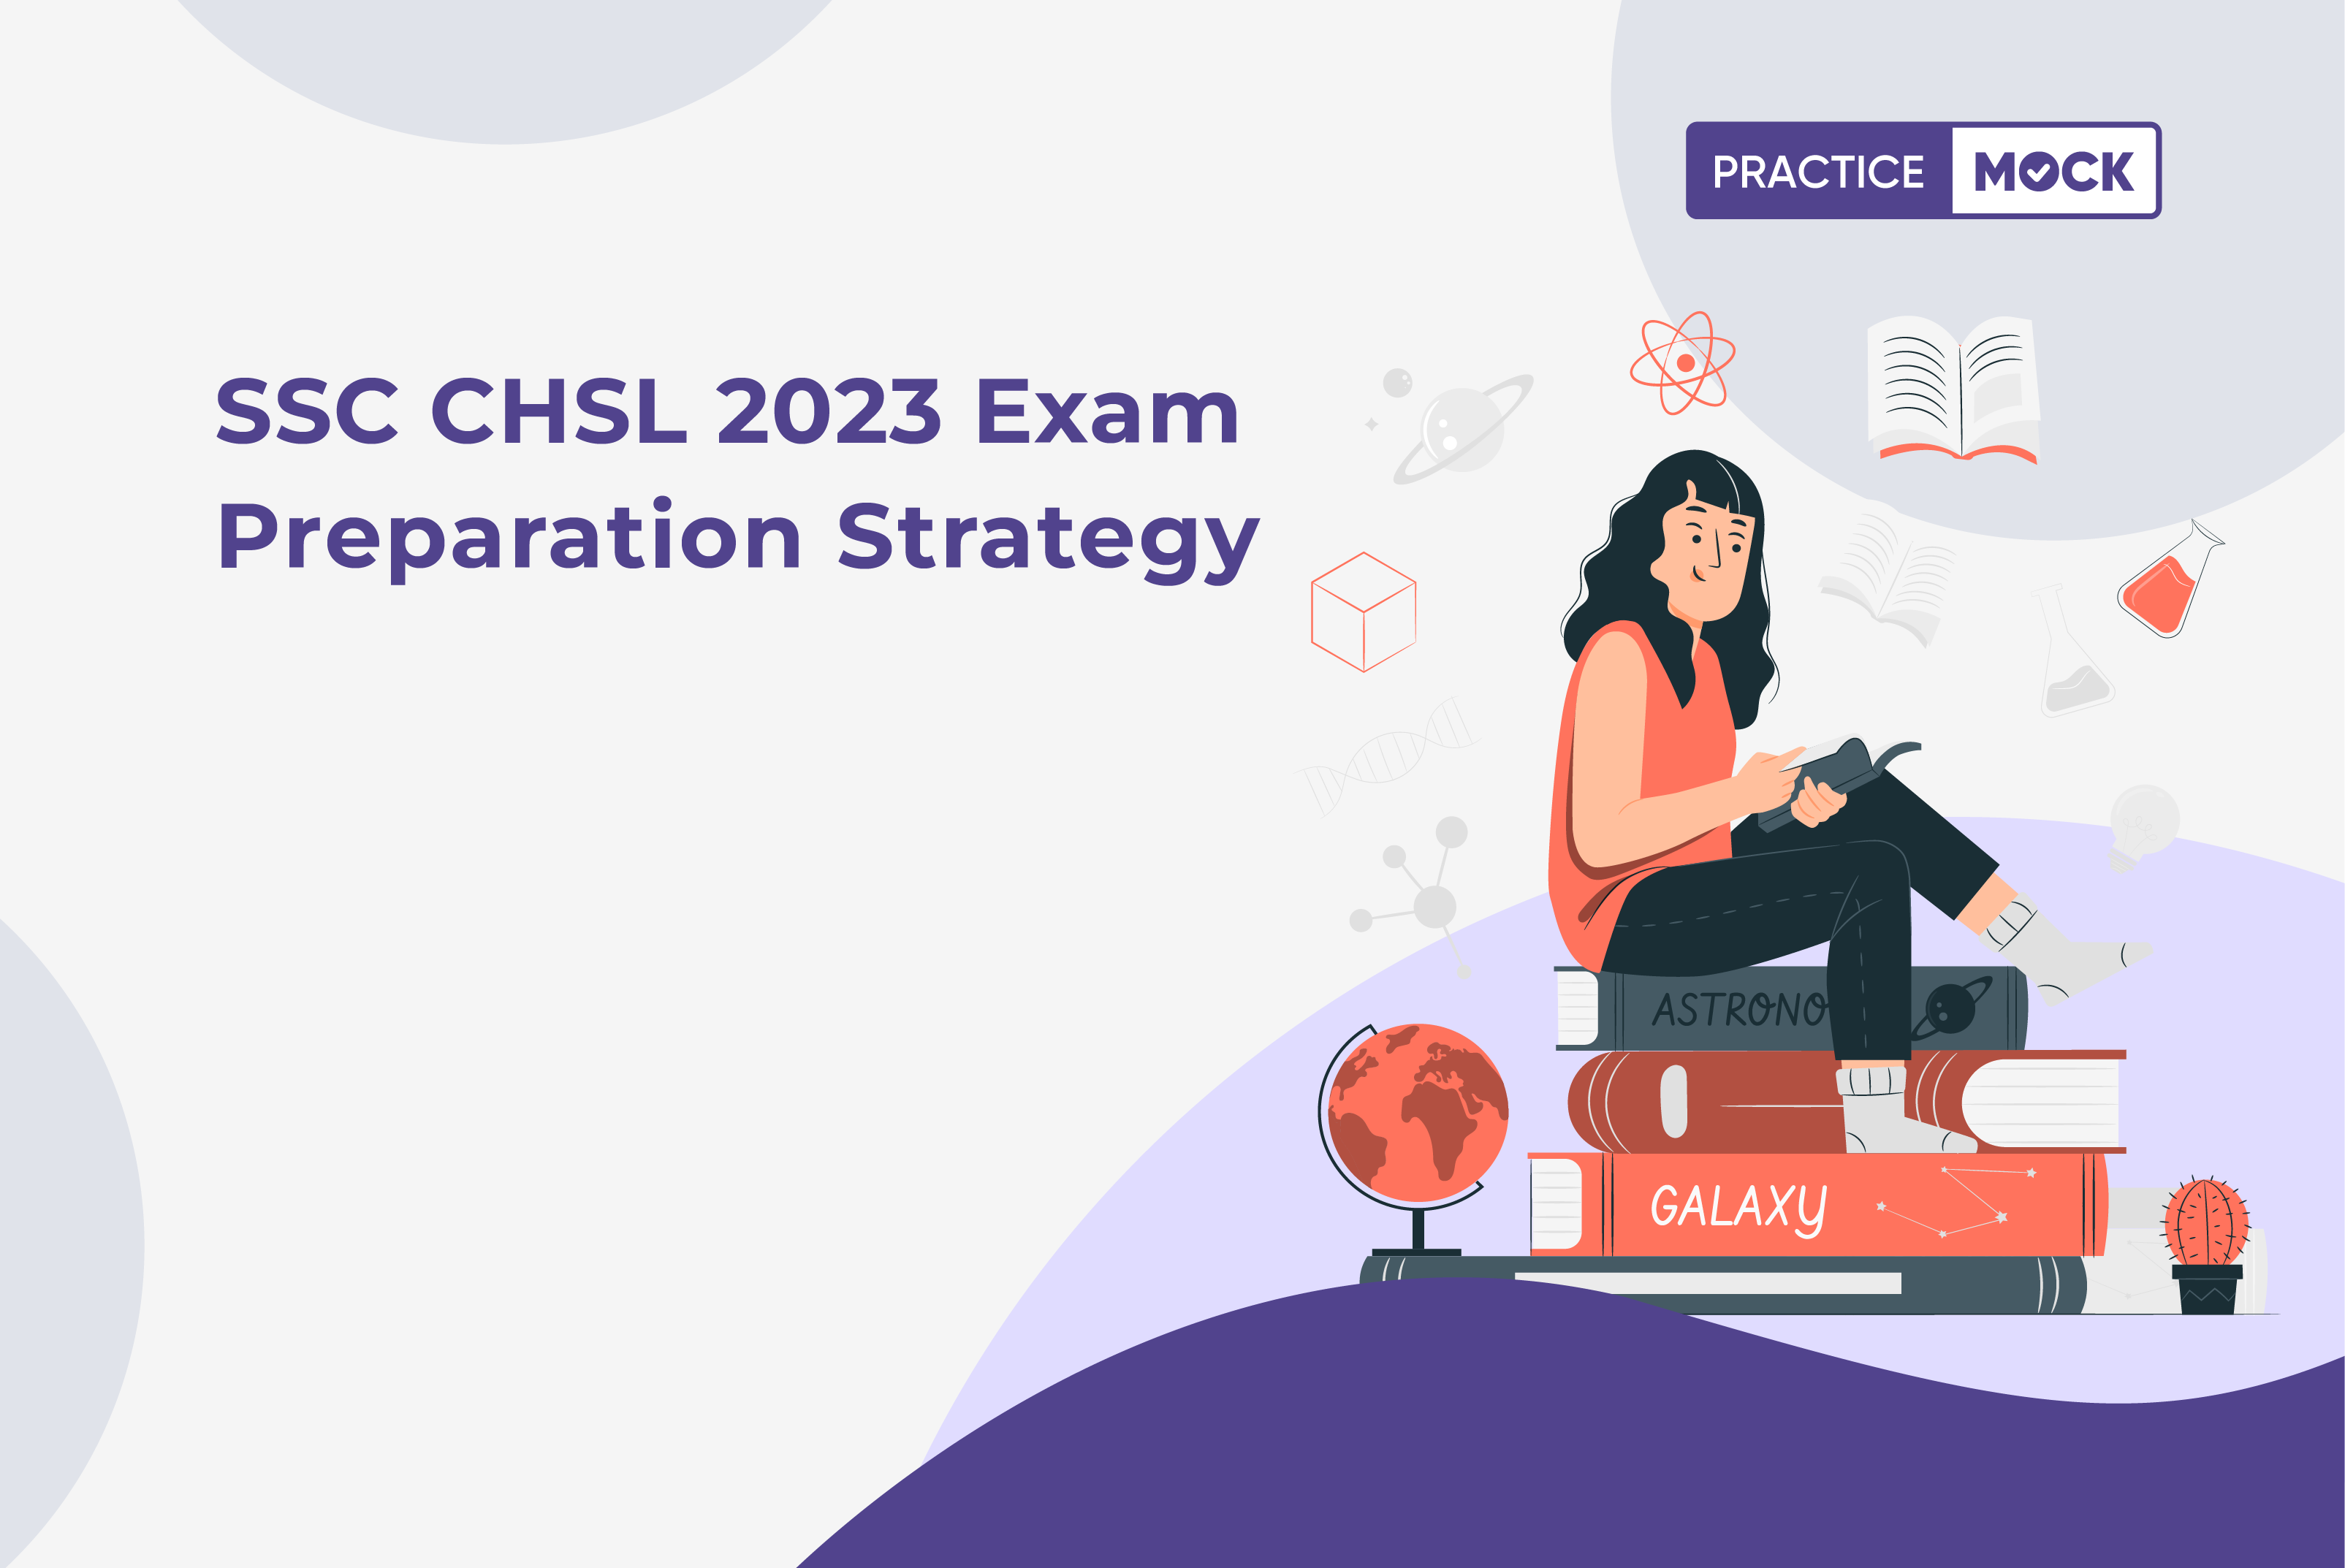 How to Clear SSC CHSL 2023 Exam in the First Attempt?